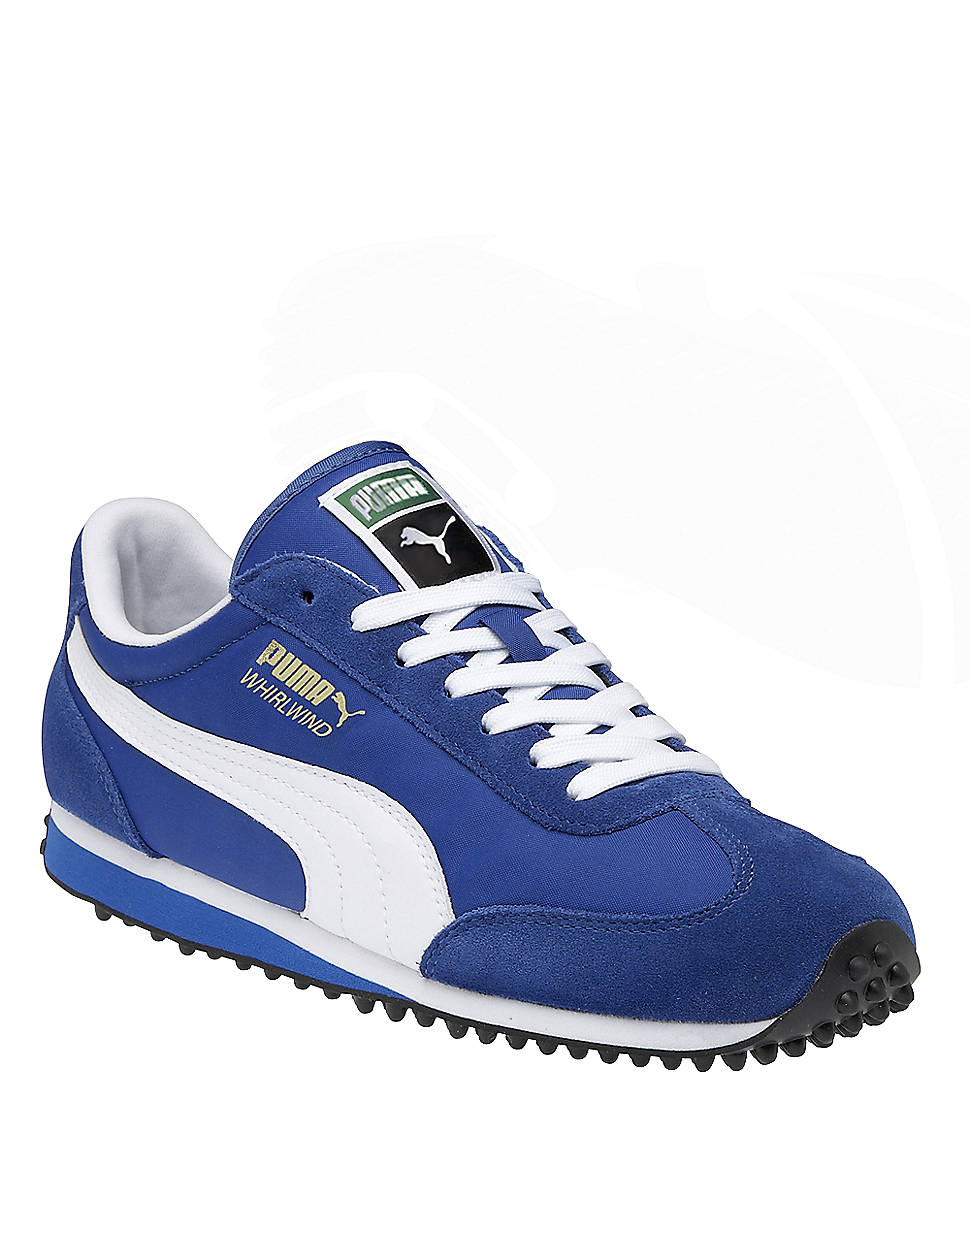 Lyst - Puma Whirlwind Classic Sneakers in Blue for Men